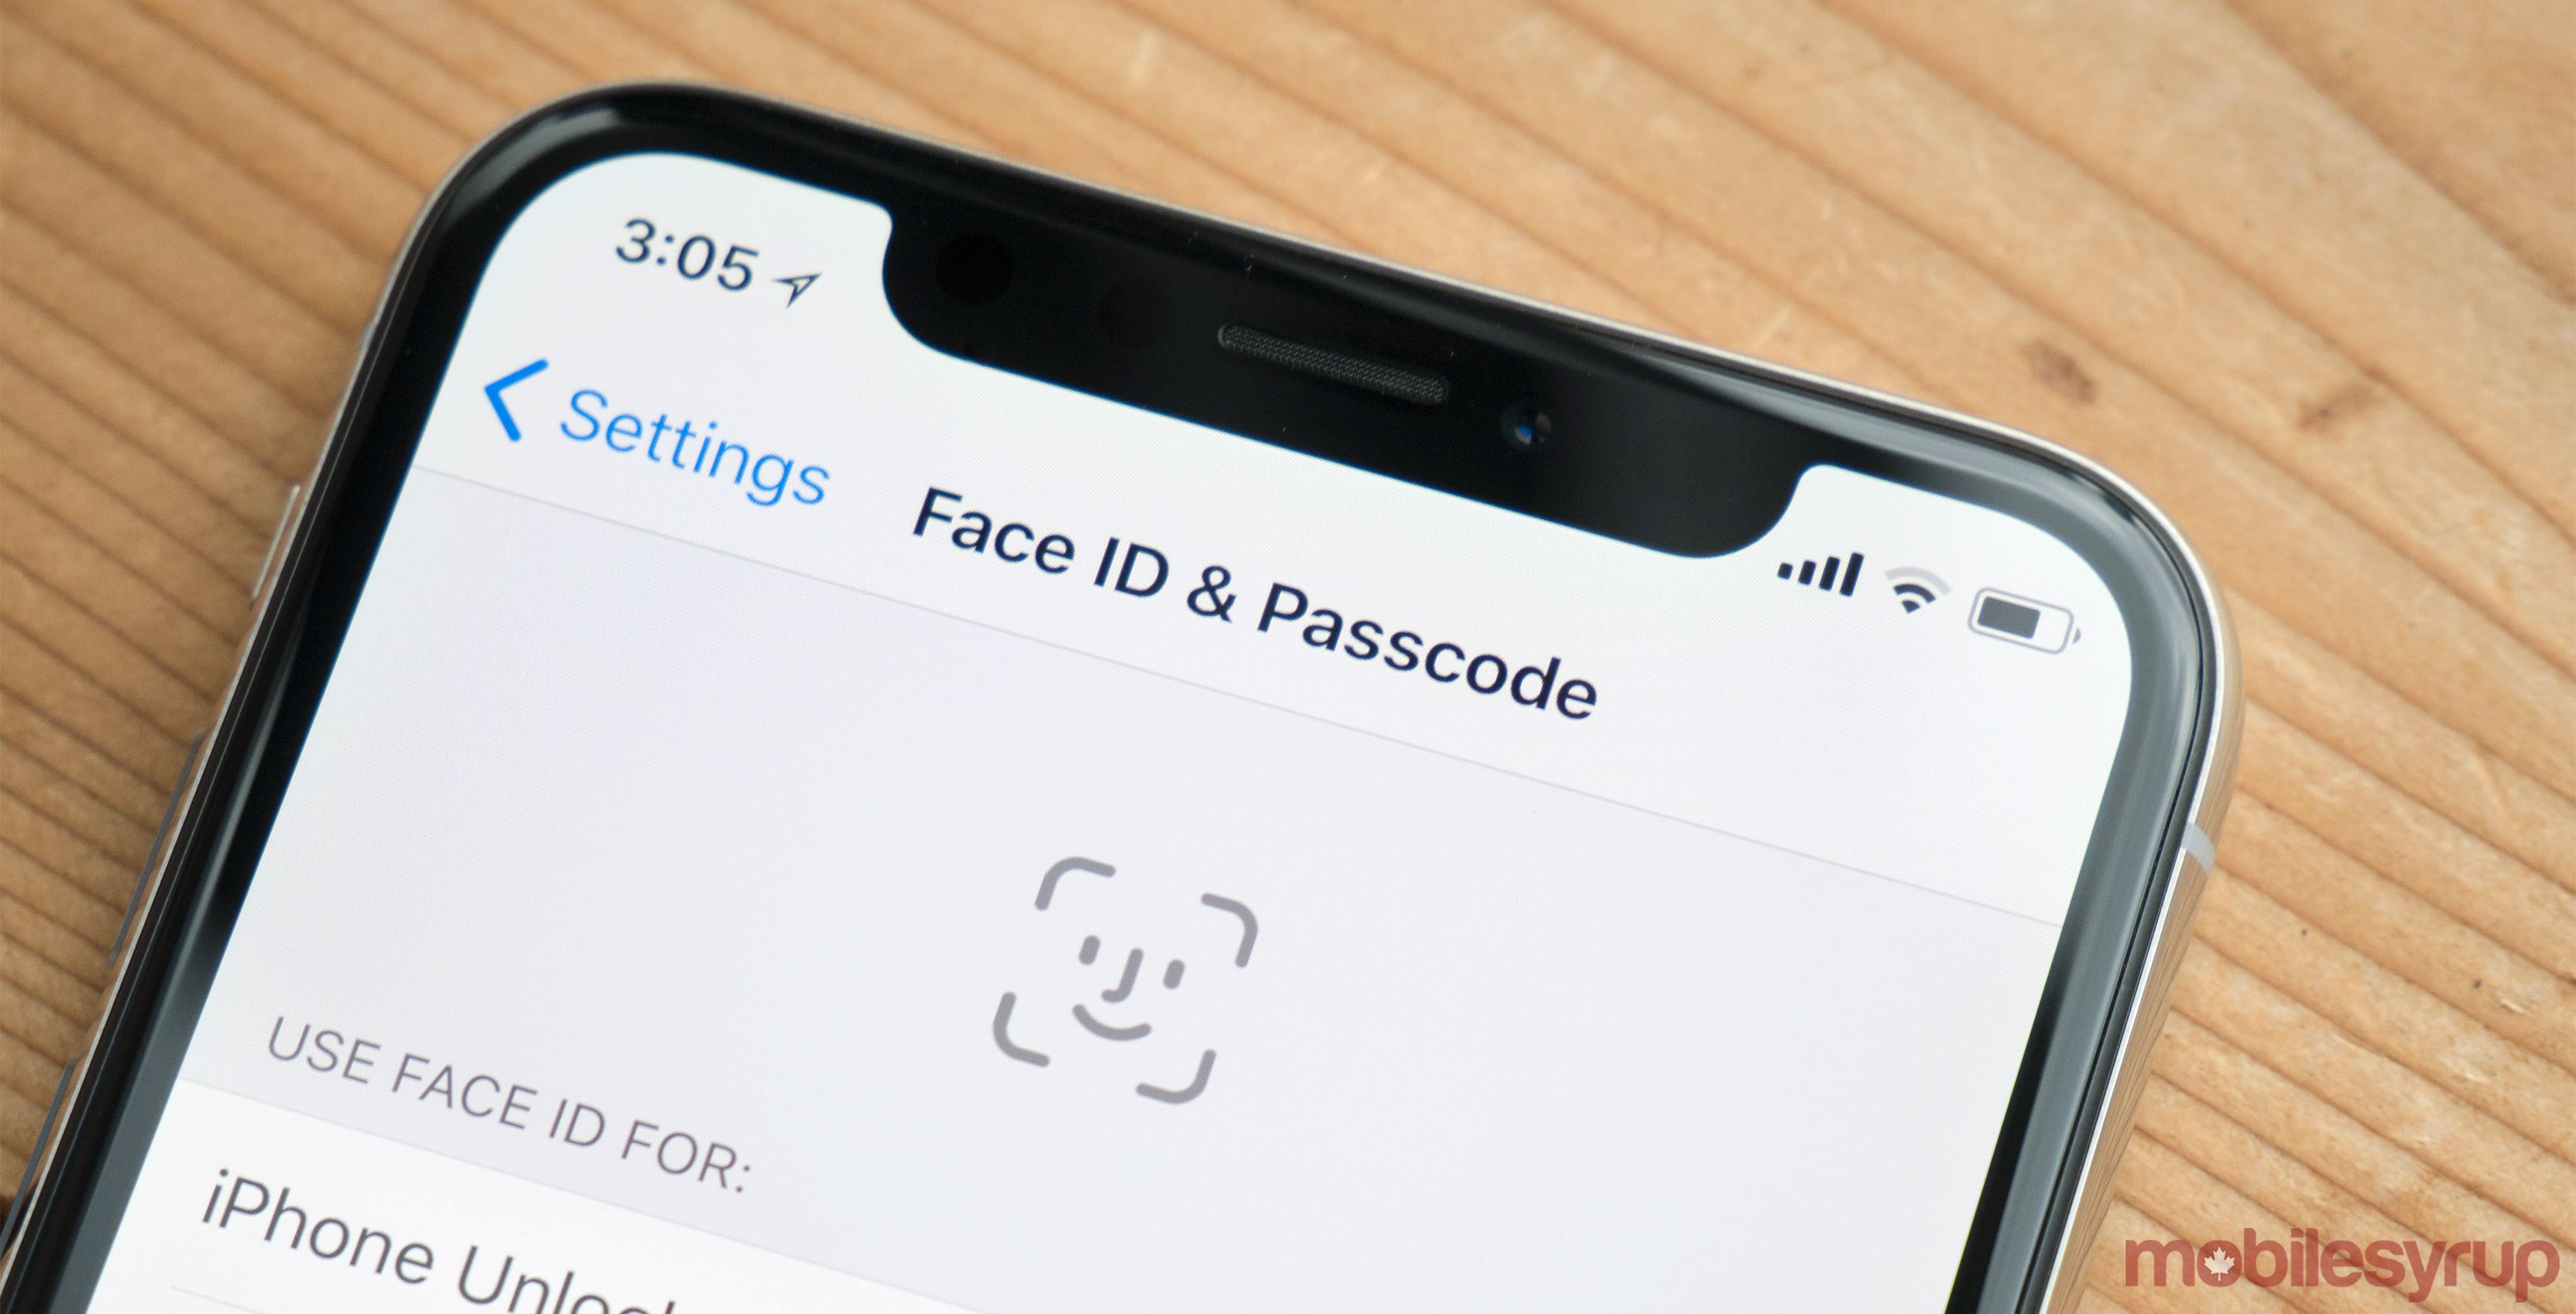 Researchers reveal bypassing Apple's Face ID using special glasses